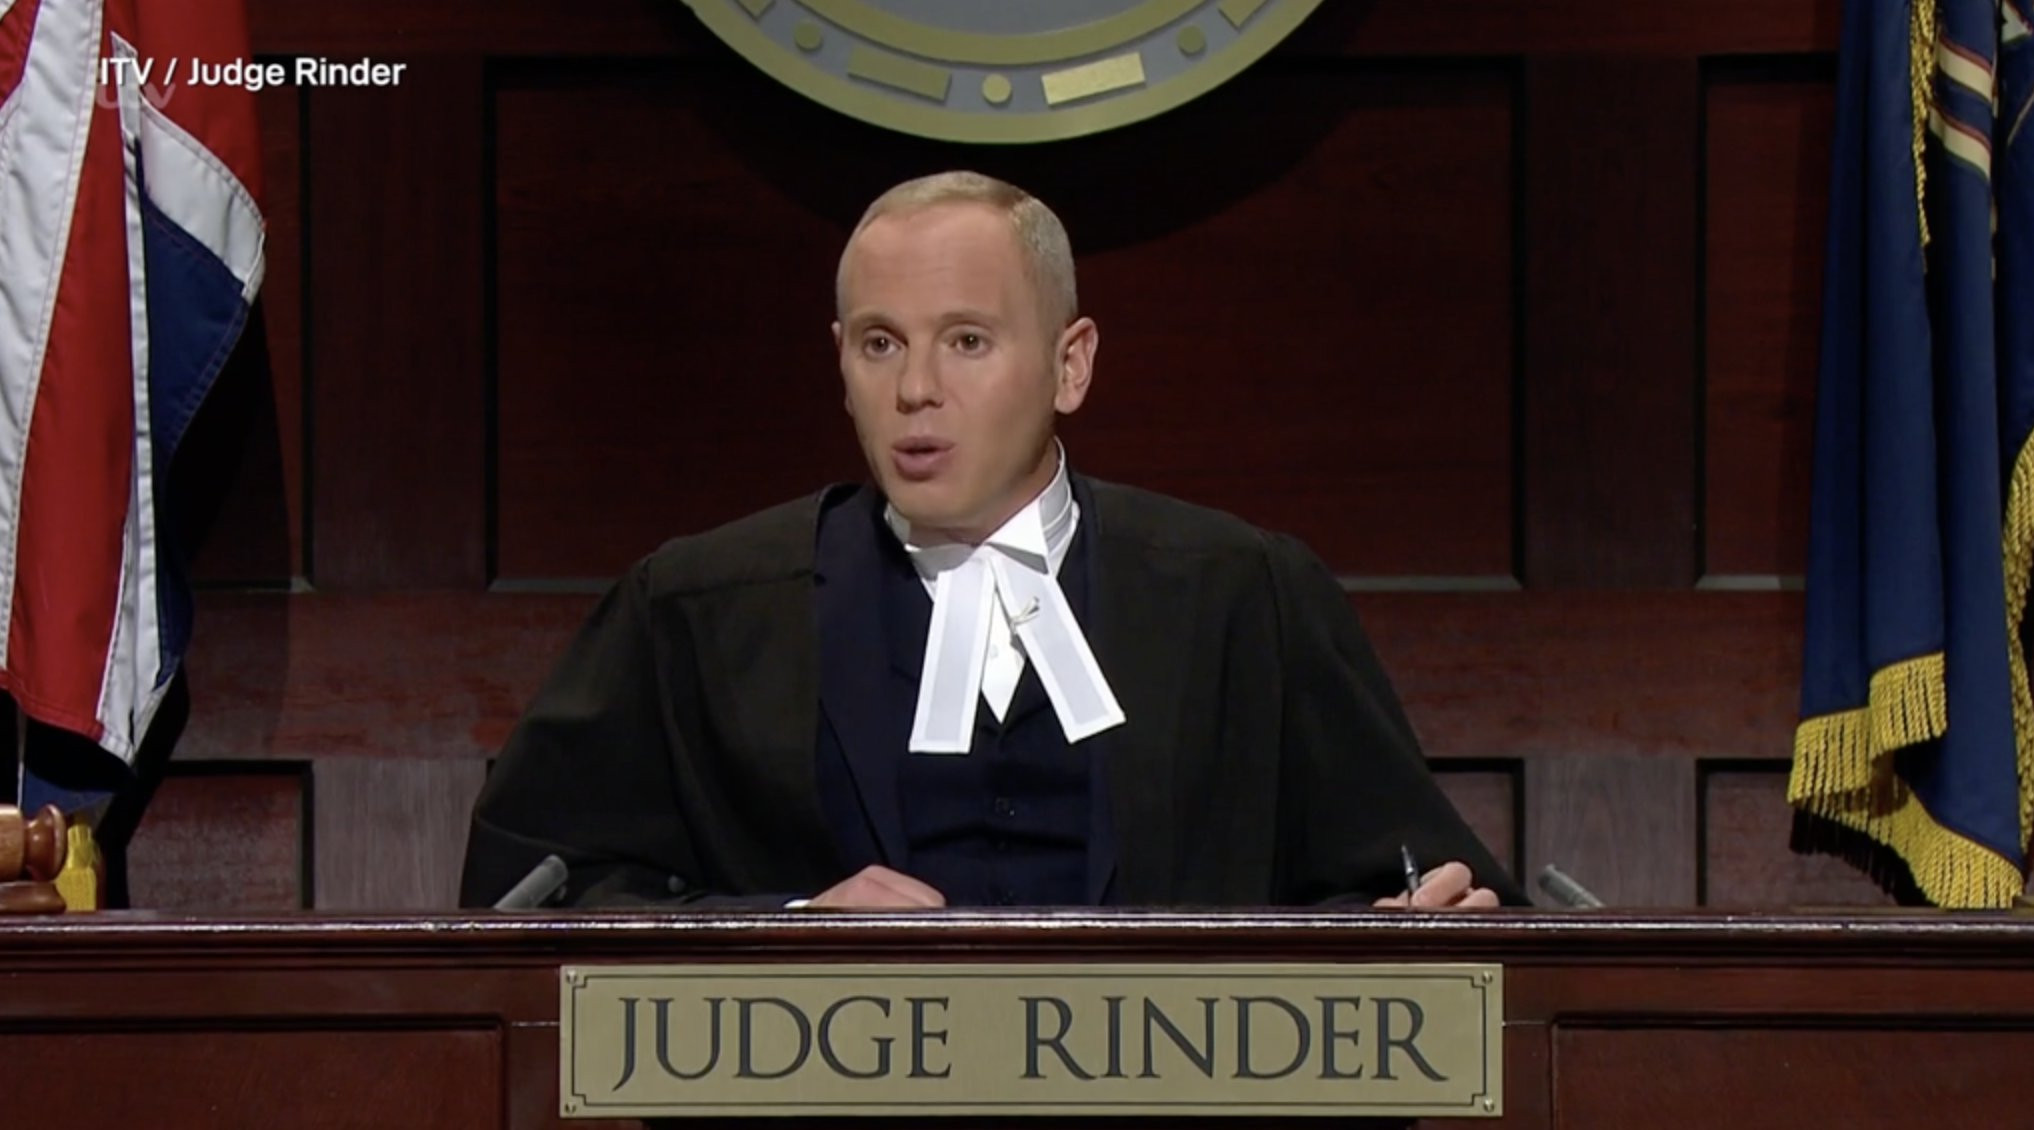 Does Judge Rinder have a partner and who are his famous friends?